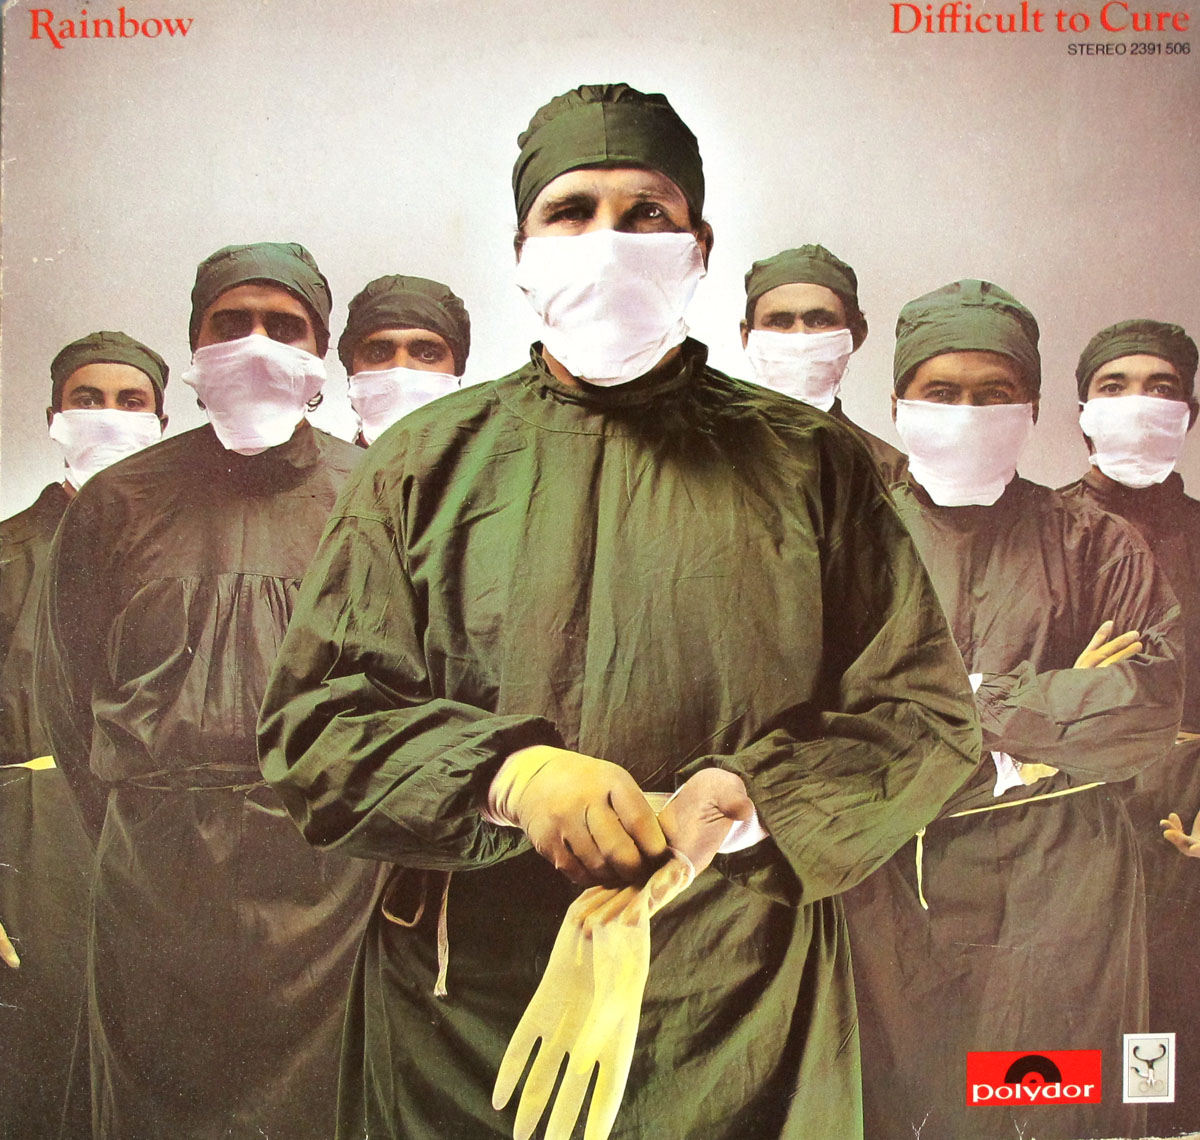 High Resolution Photos of rainbow difficult to cure germany 